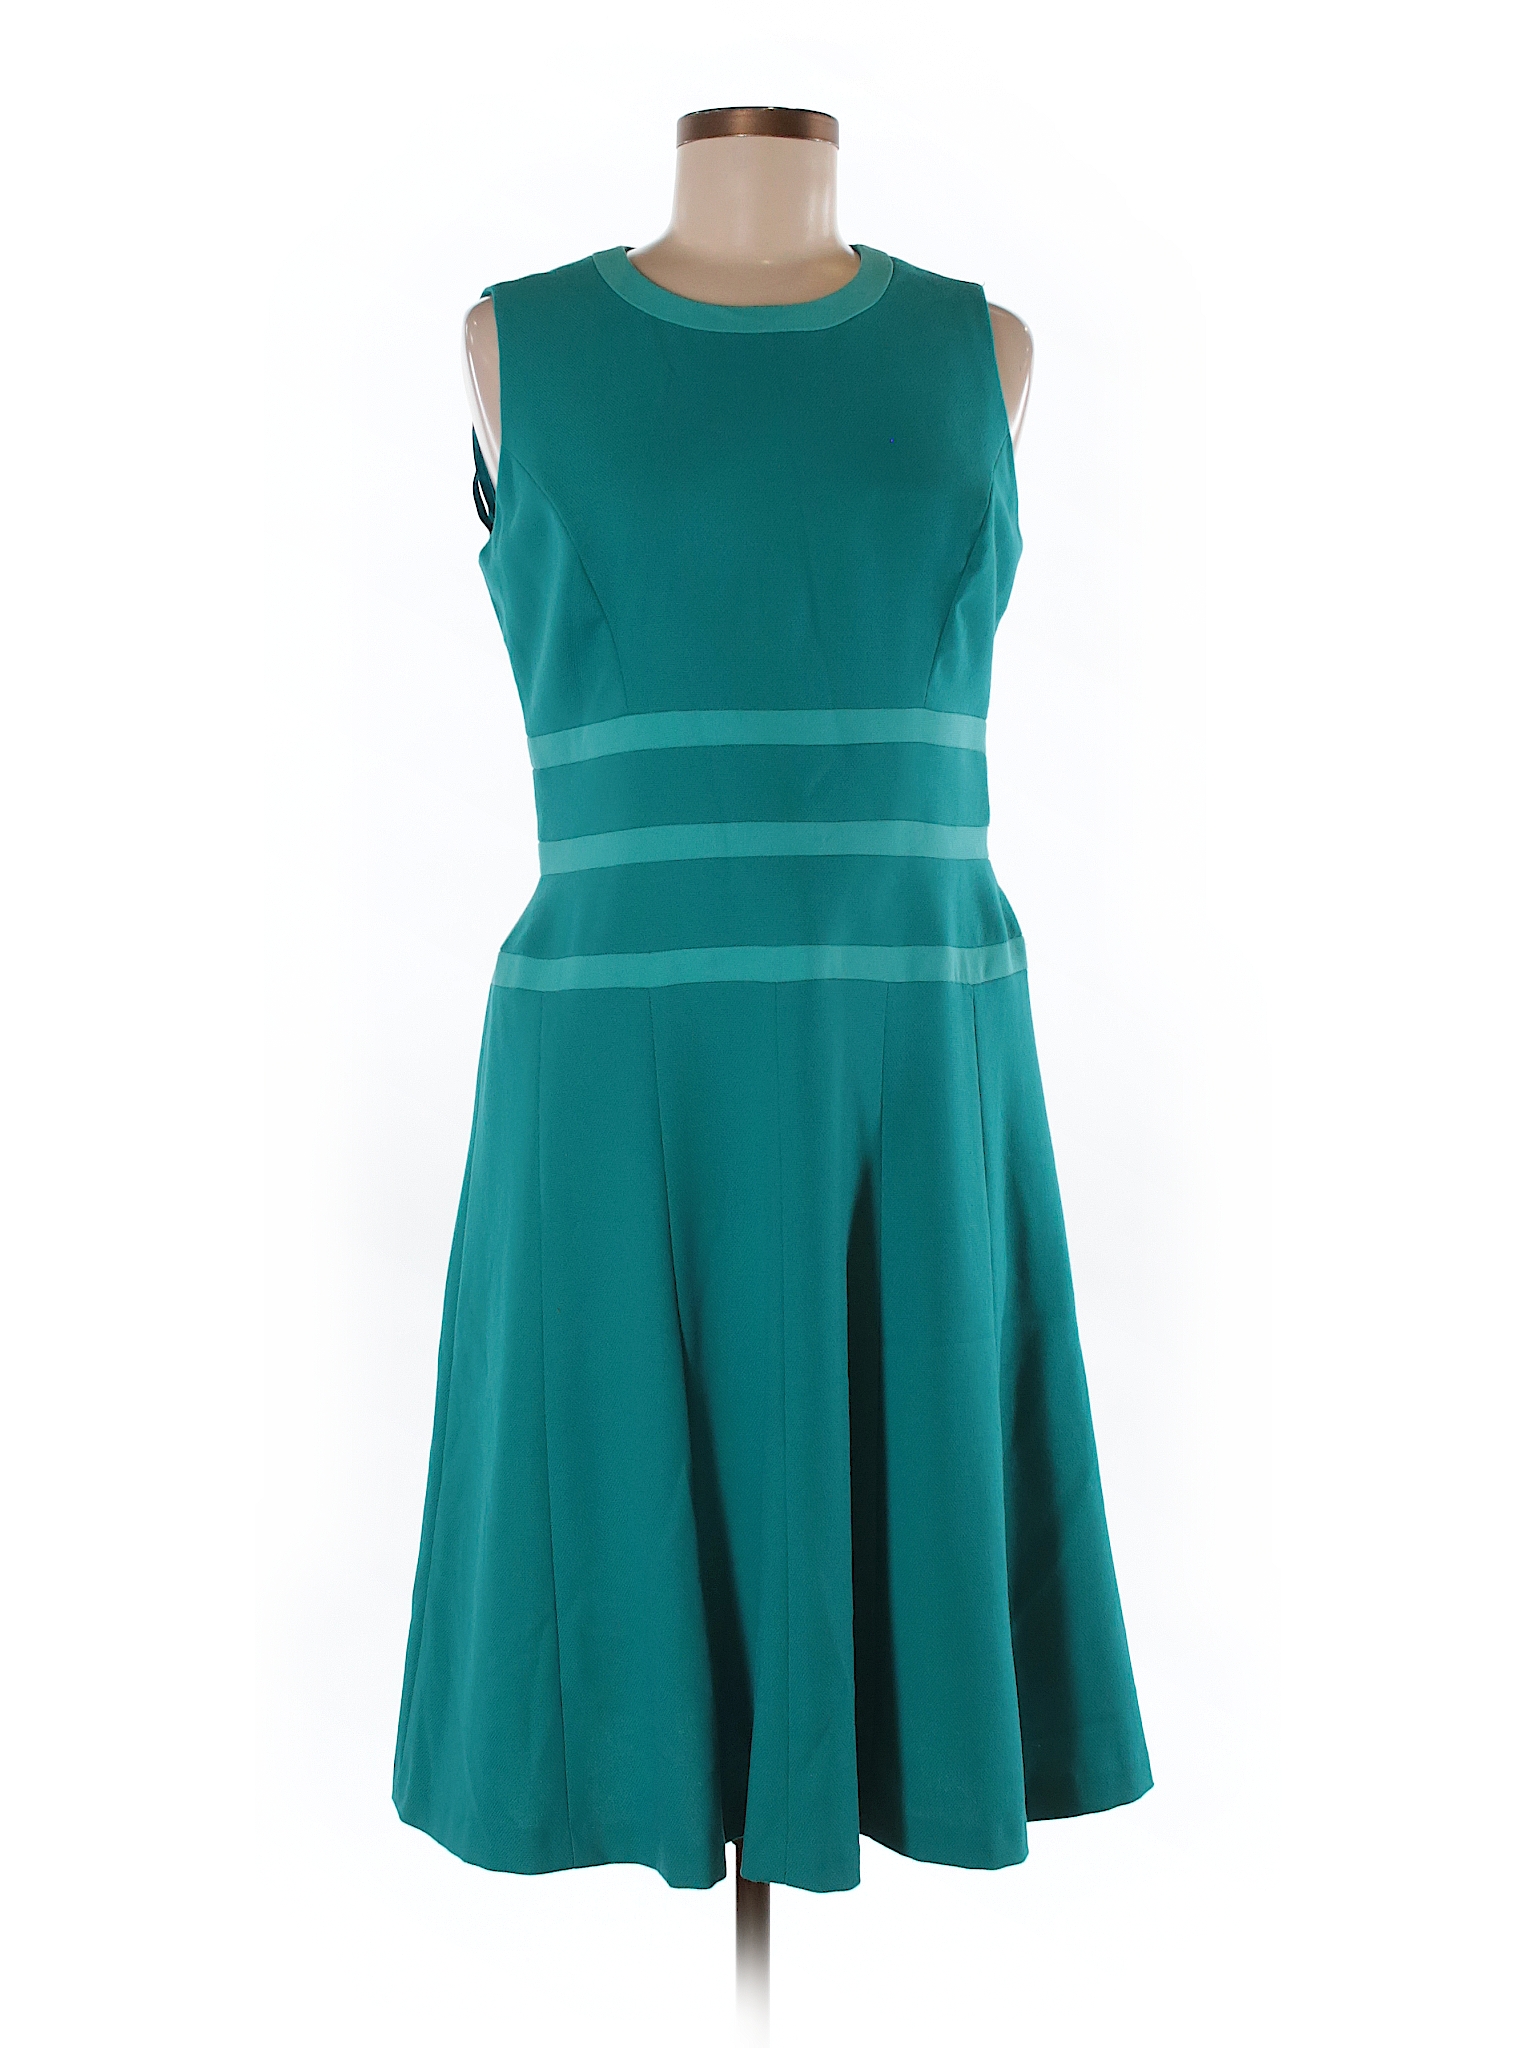 Anne Klein Solid Teal Casual Dress Size 8 (Petite) - 71% off | thredUP